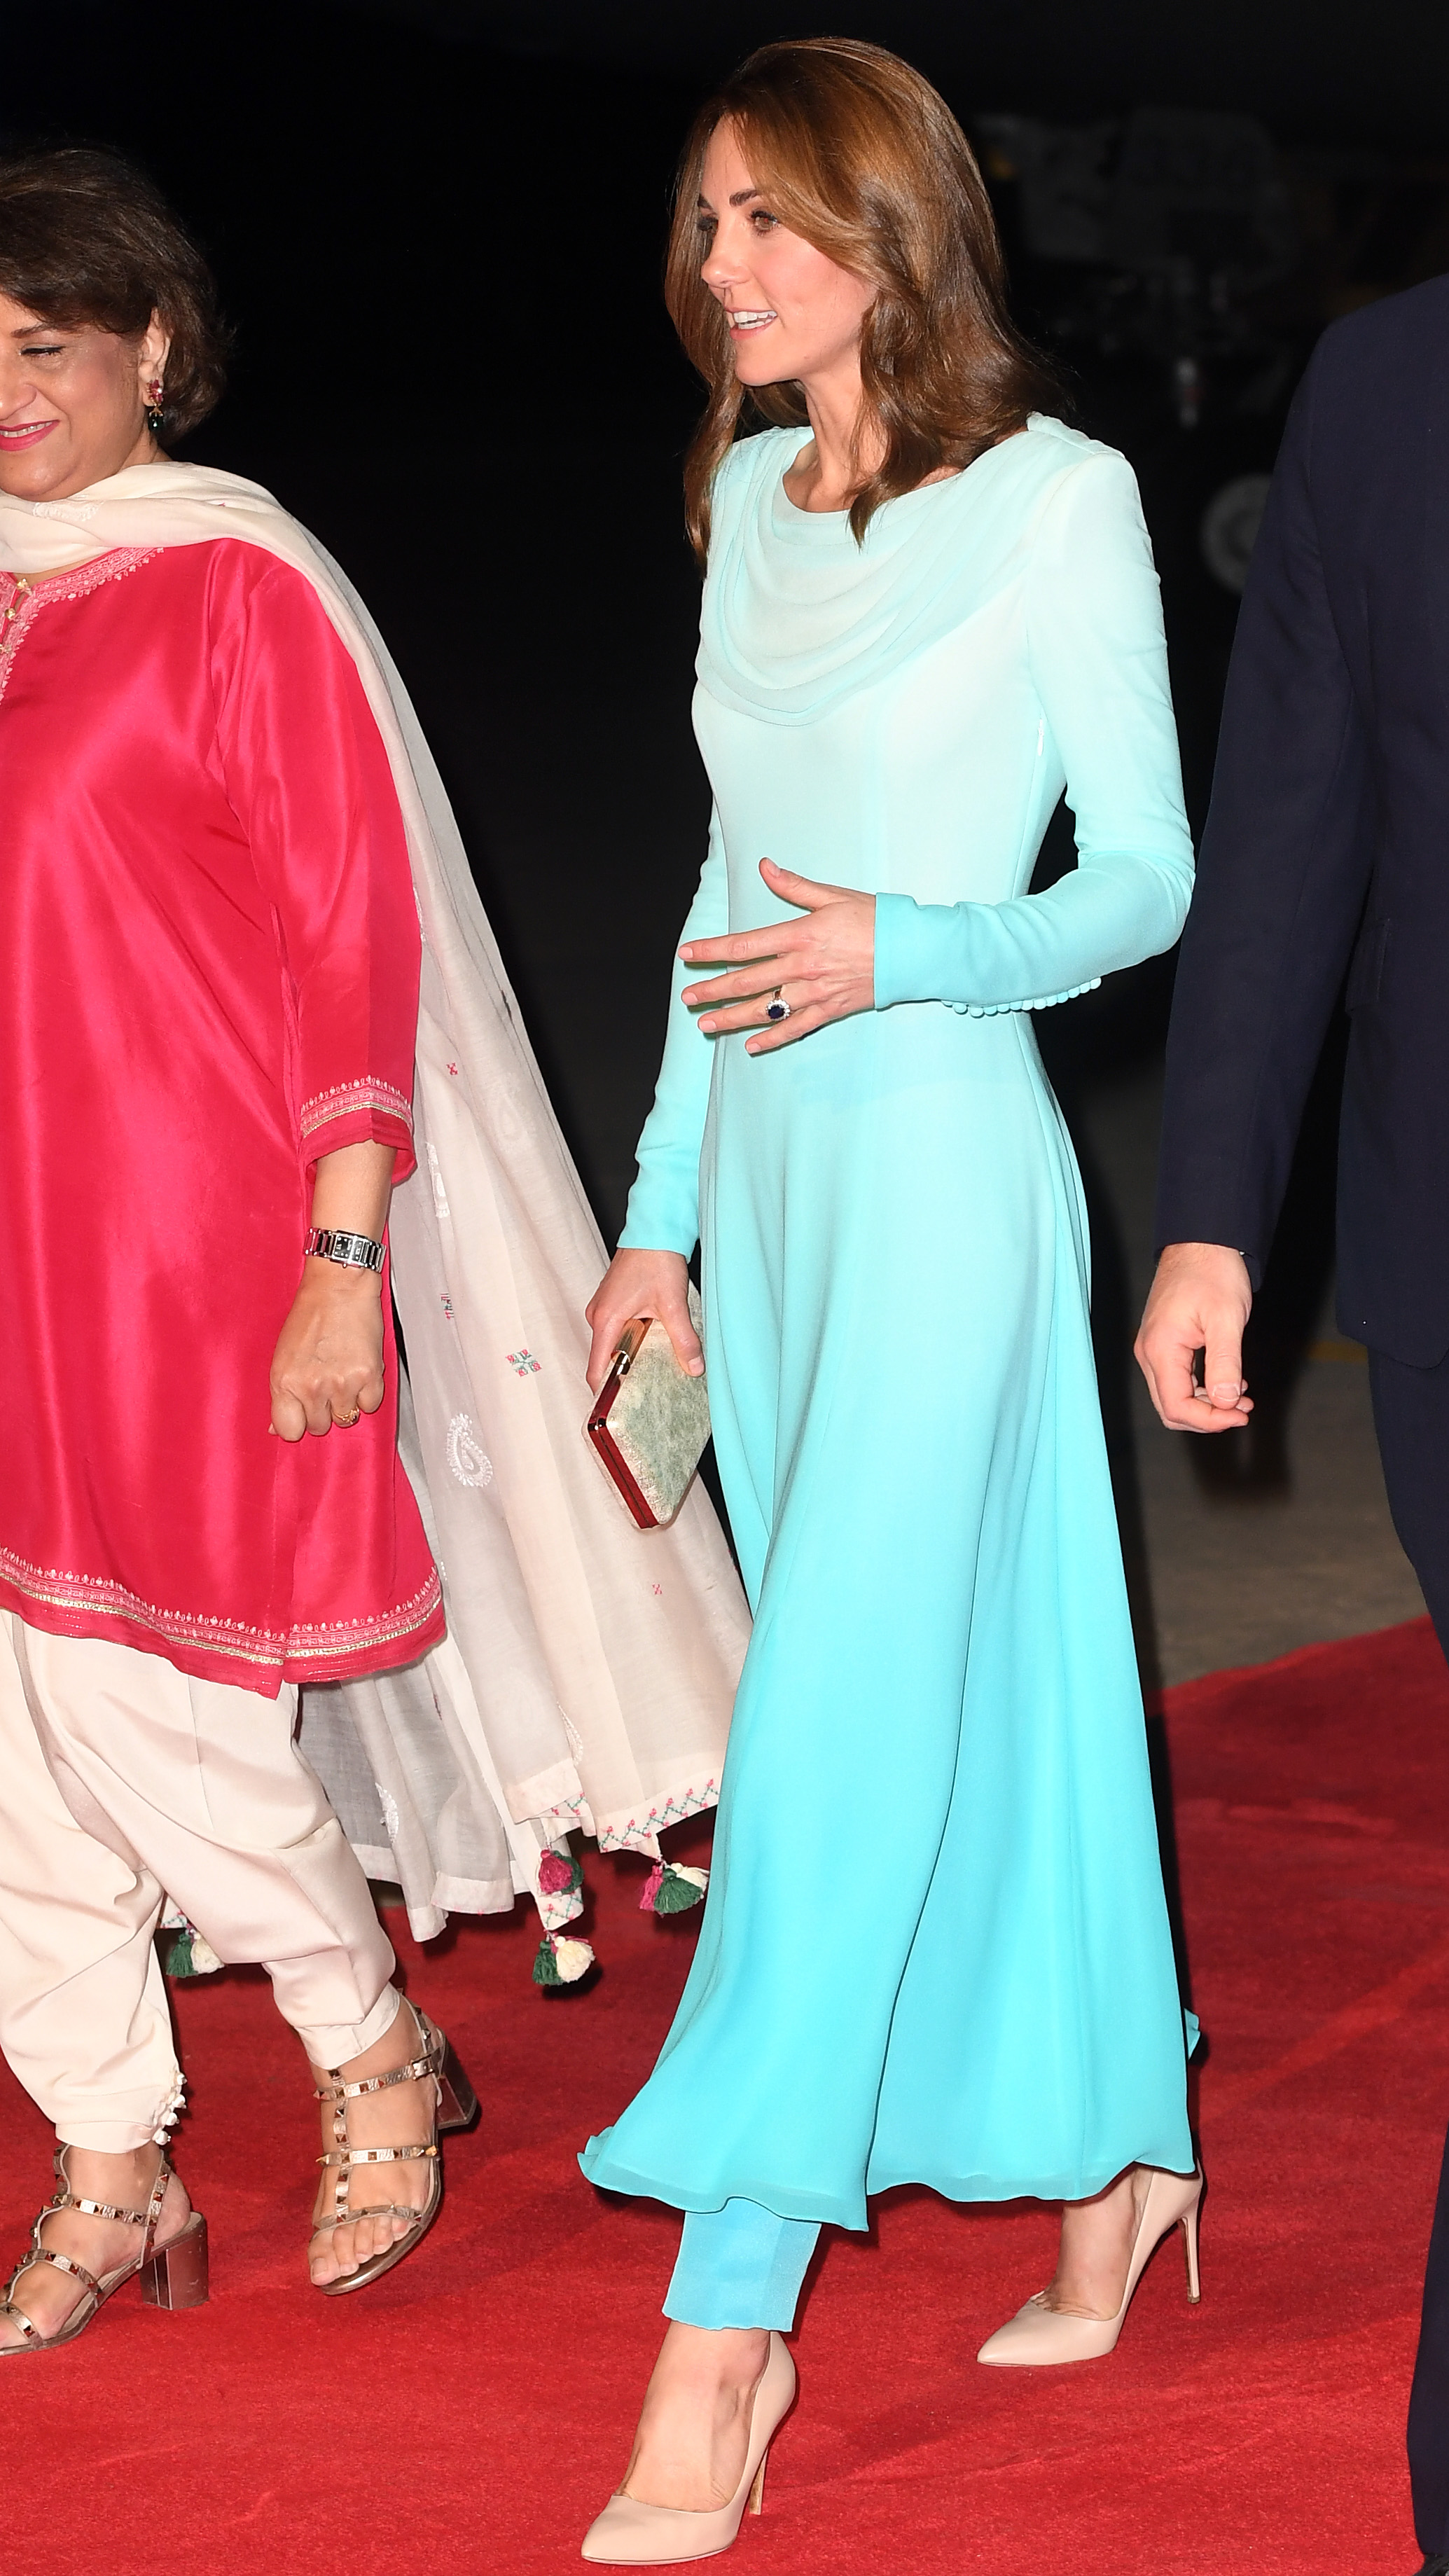 ROYAL TOUR: Kate Middleton channels Princess Diana with elegant outfit ...